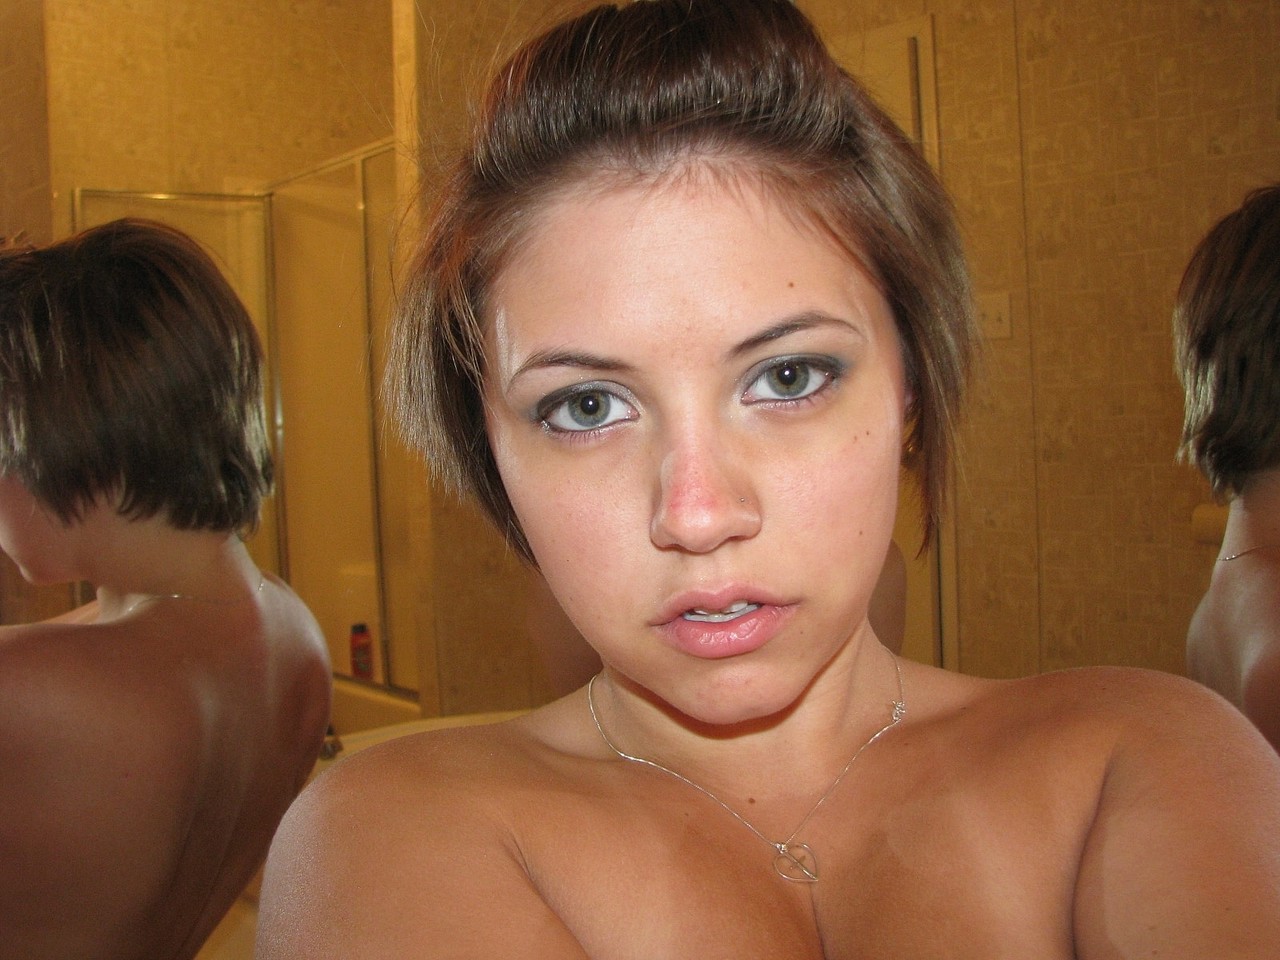 Sexy teen amateur shows off her big breasts while taking nude photos ポルノ写真 #427315191 | Teen Girl Photos Pics, Amateur, モバイルポルノ